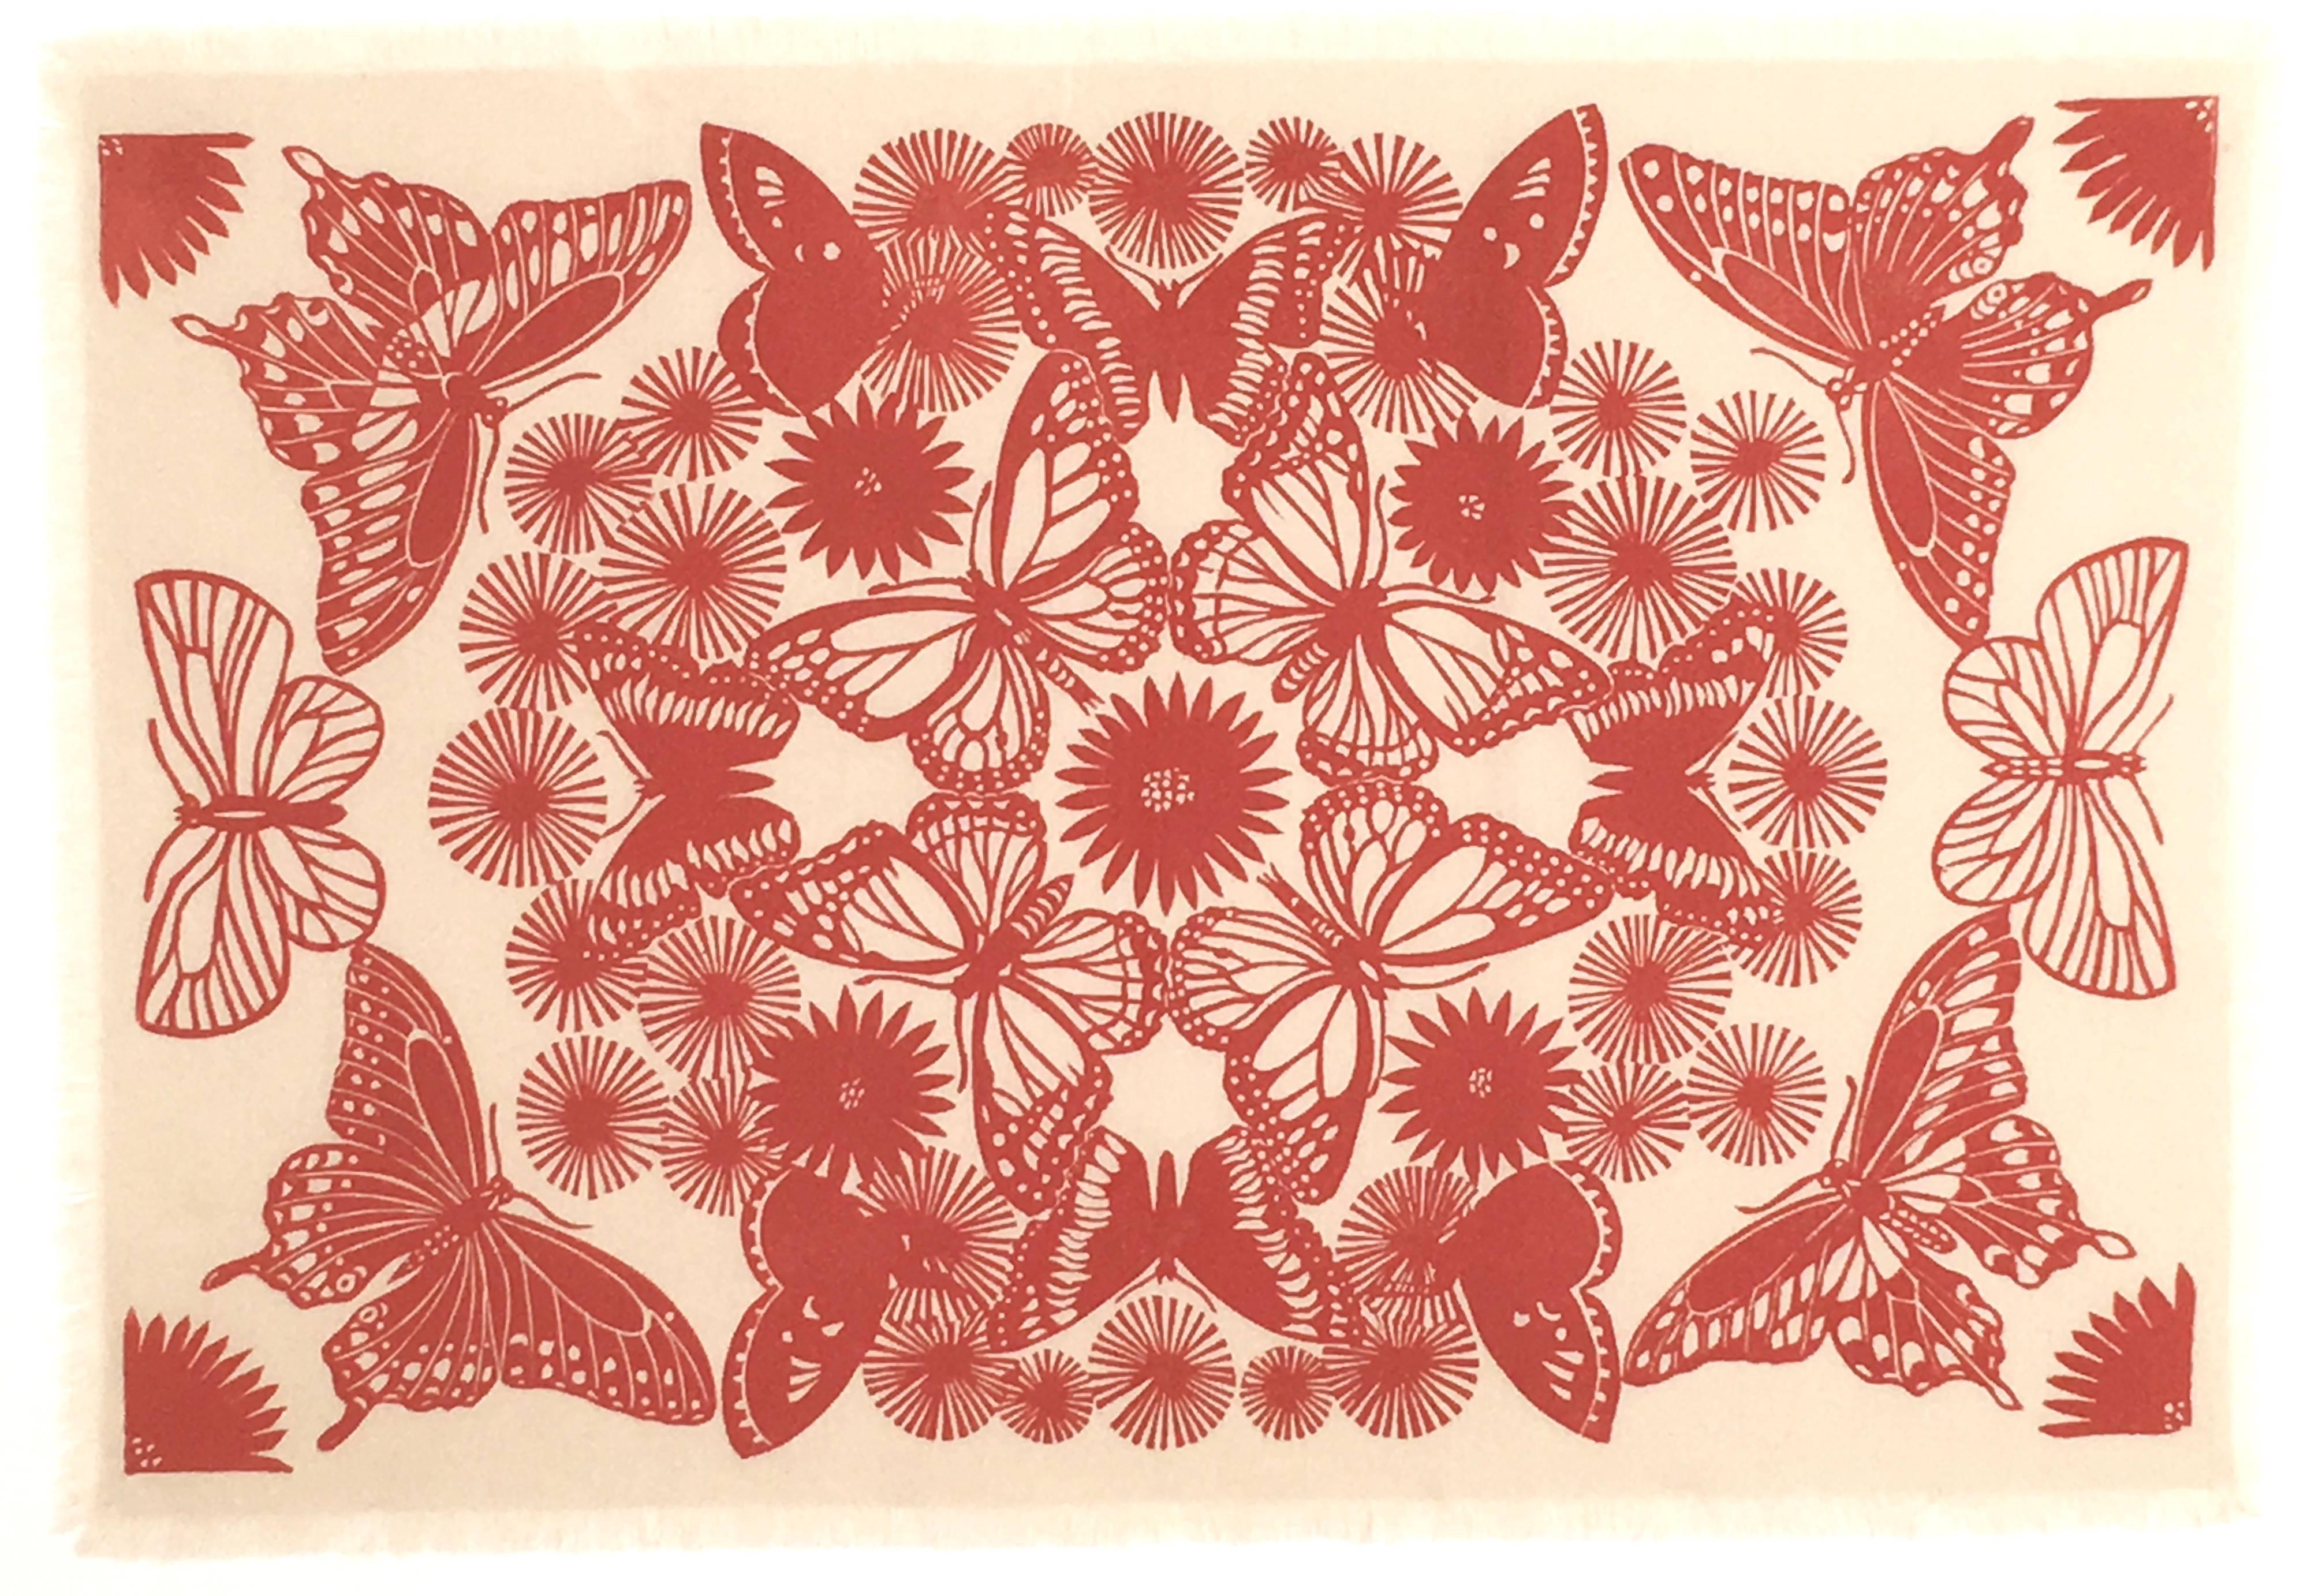 An original hand block printed Folly Cove Designers textile in the Field Trip pattern by Lee Natti, featuring a graphic composition of butterflies and flowers in concentric circles, printed in tomato red on cream cotton with fringe, archivally